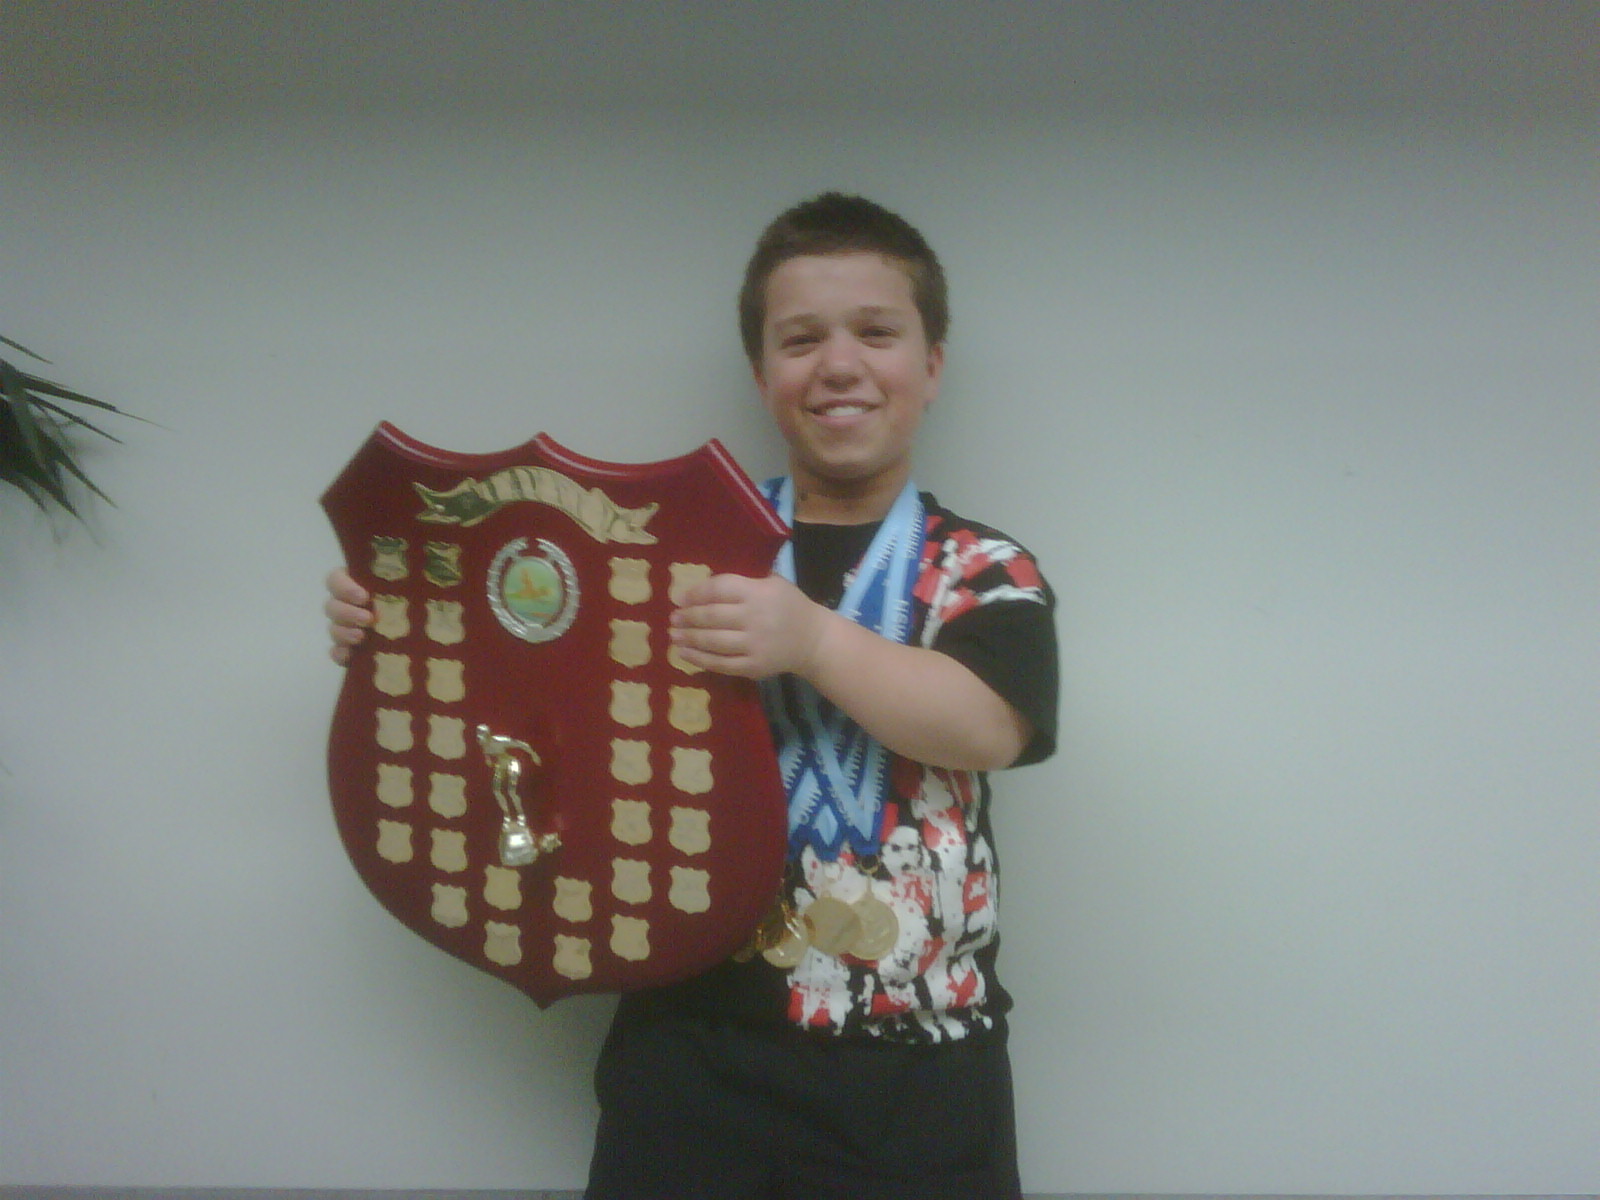 Reagan Wickens with the Beverley Whitfield Trophy